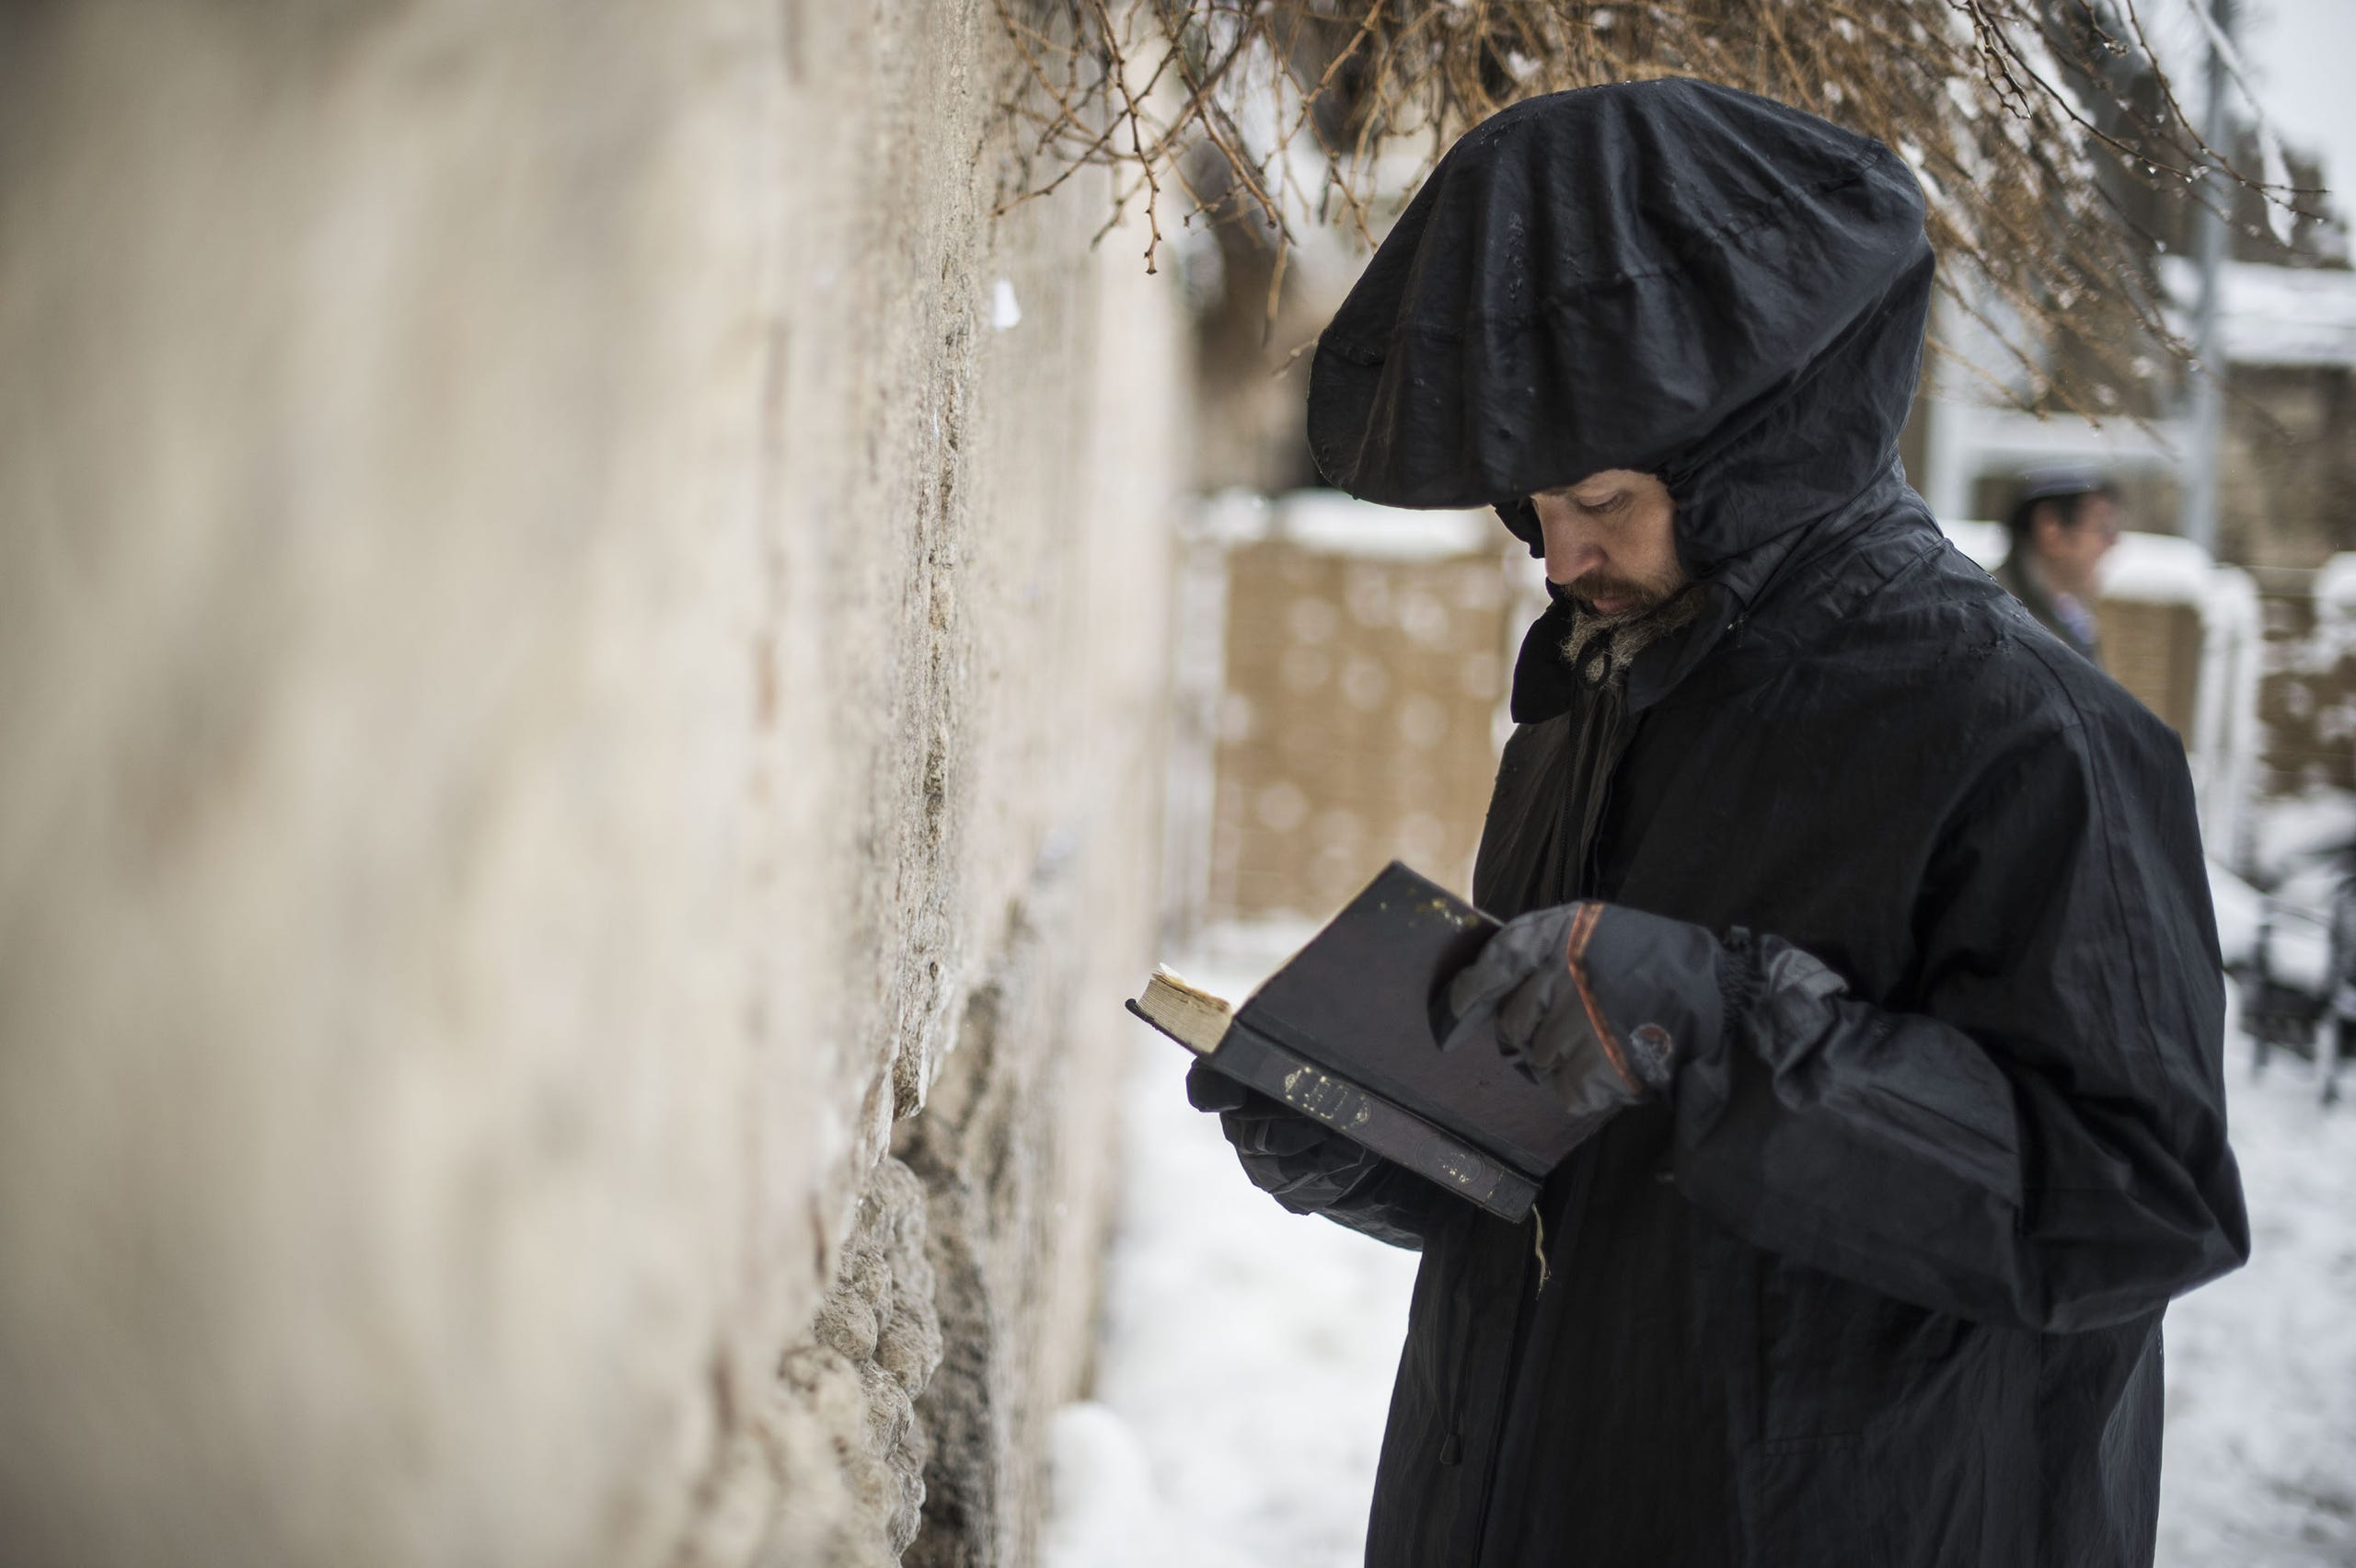 A man reads scripture at the Western Wall.